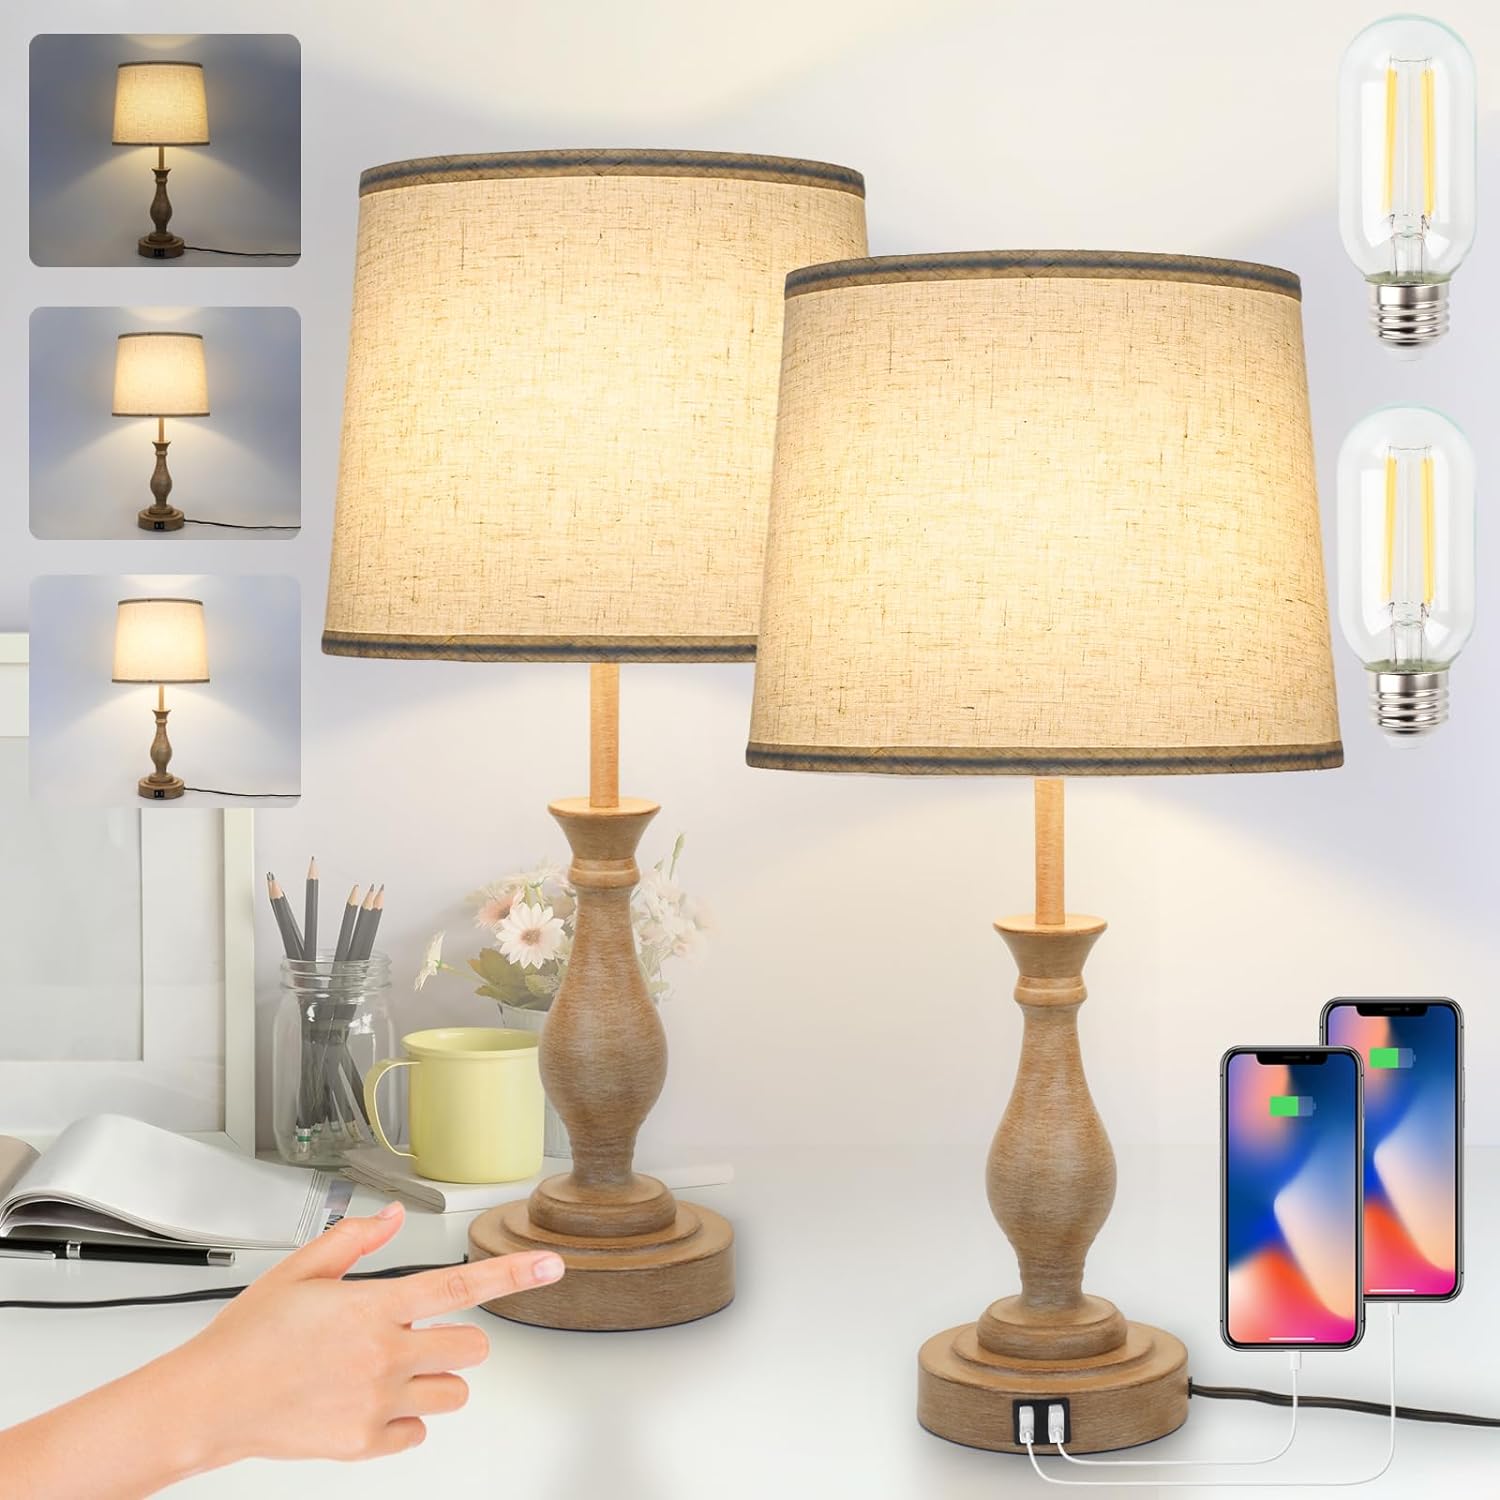 Touch Lamps for Bedrooms Set of 2, Farmhouse Table Lamp with Dual USB Charging Ports, 3 Way Dimmable Nightstand Lamps with Linen Fabric Lampshade for Bedroom, Living Room (Pack2-01A)